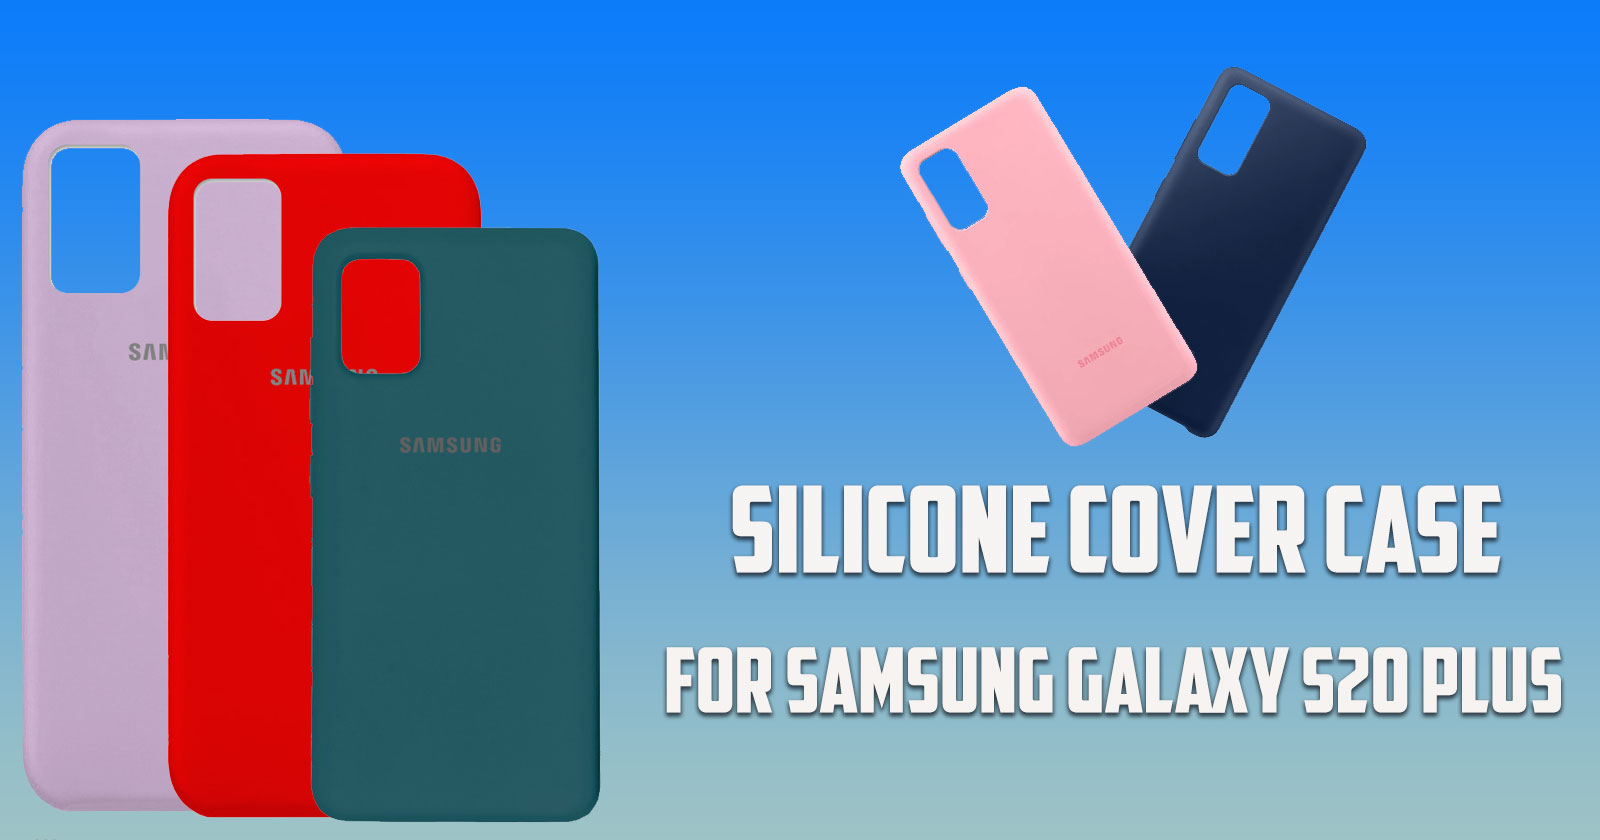 Silicone Cover Case for Samsung Galaxy S20 Plus